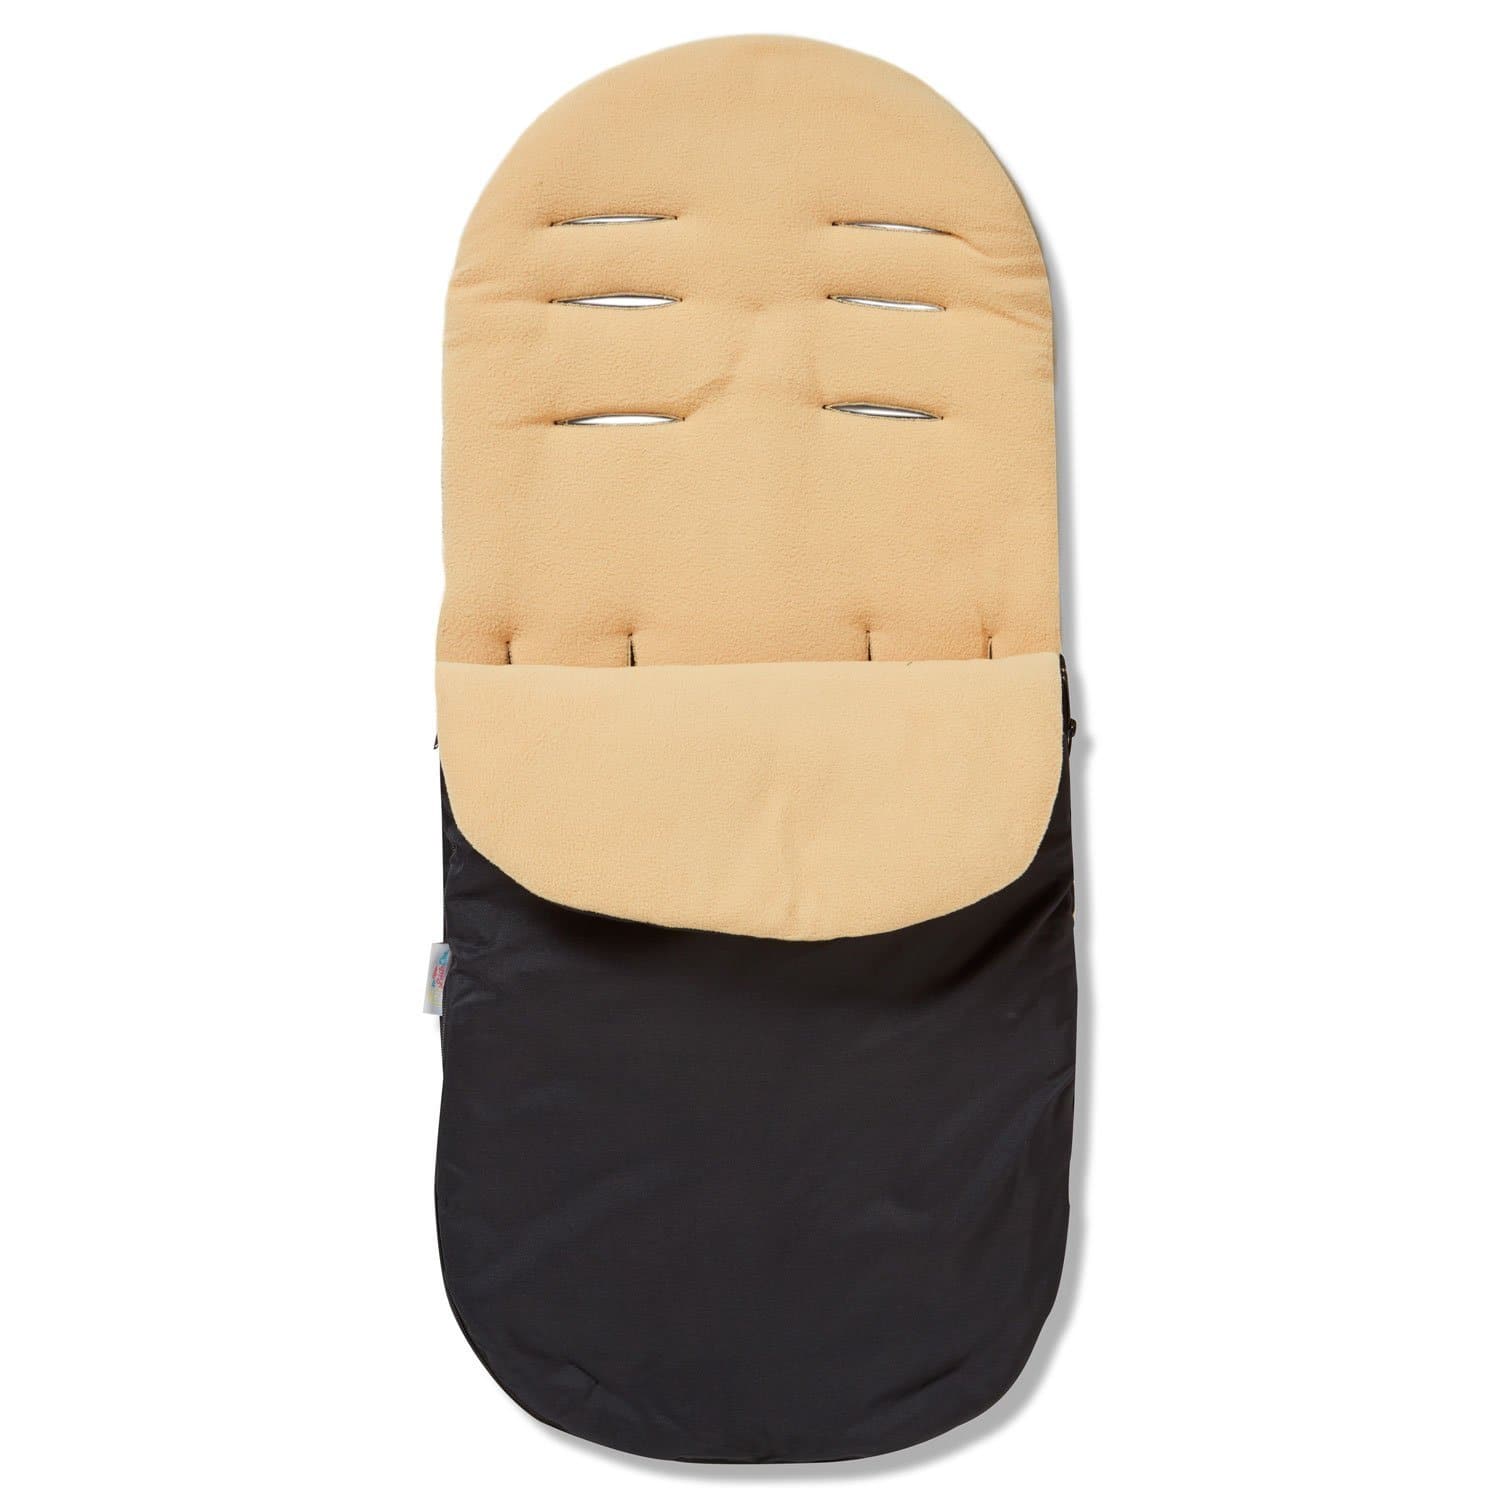 Footmuff / Cosy Toes Compatible with Valco - Sand / Fits All Models | For Your Little One